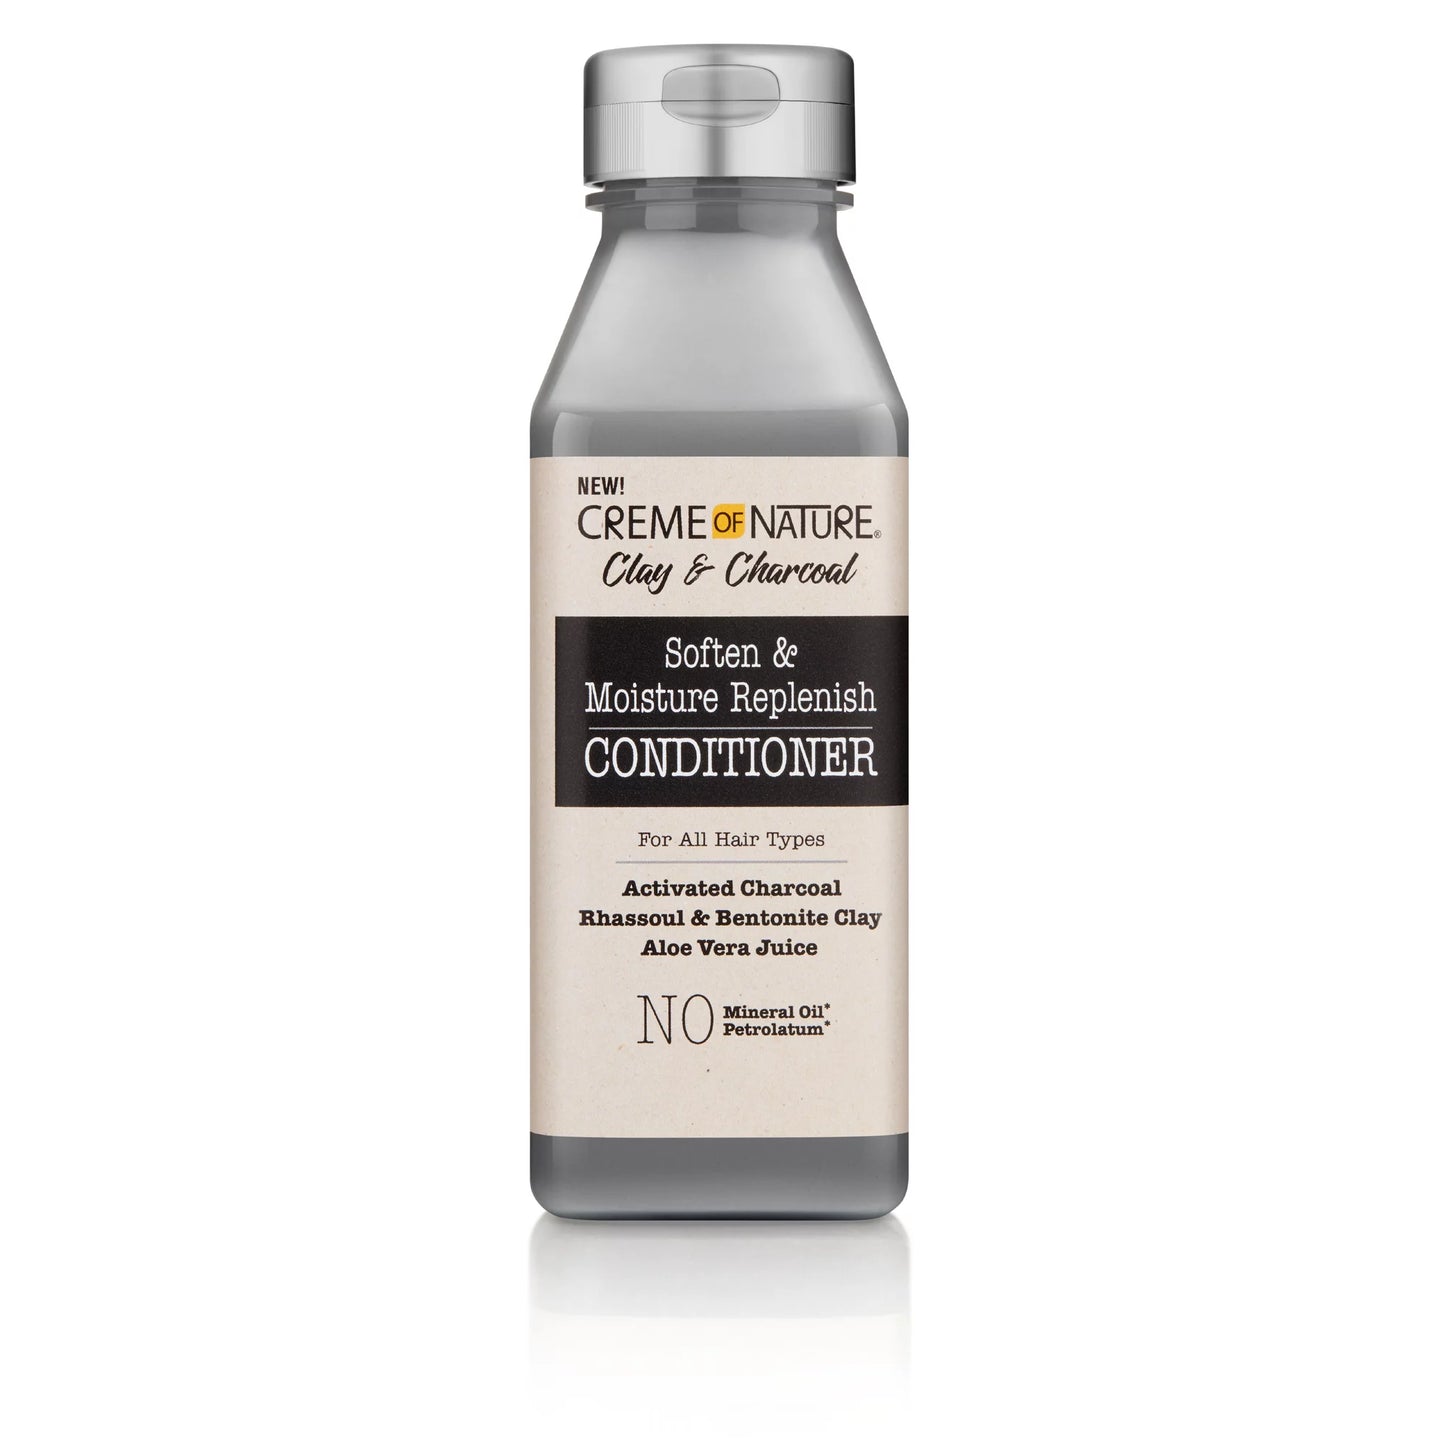 Clay & Charcoal Soften And Moisture Replenish Conditioner